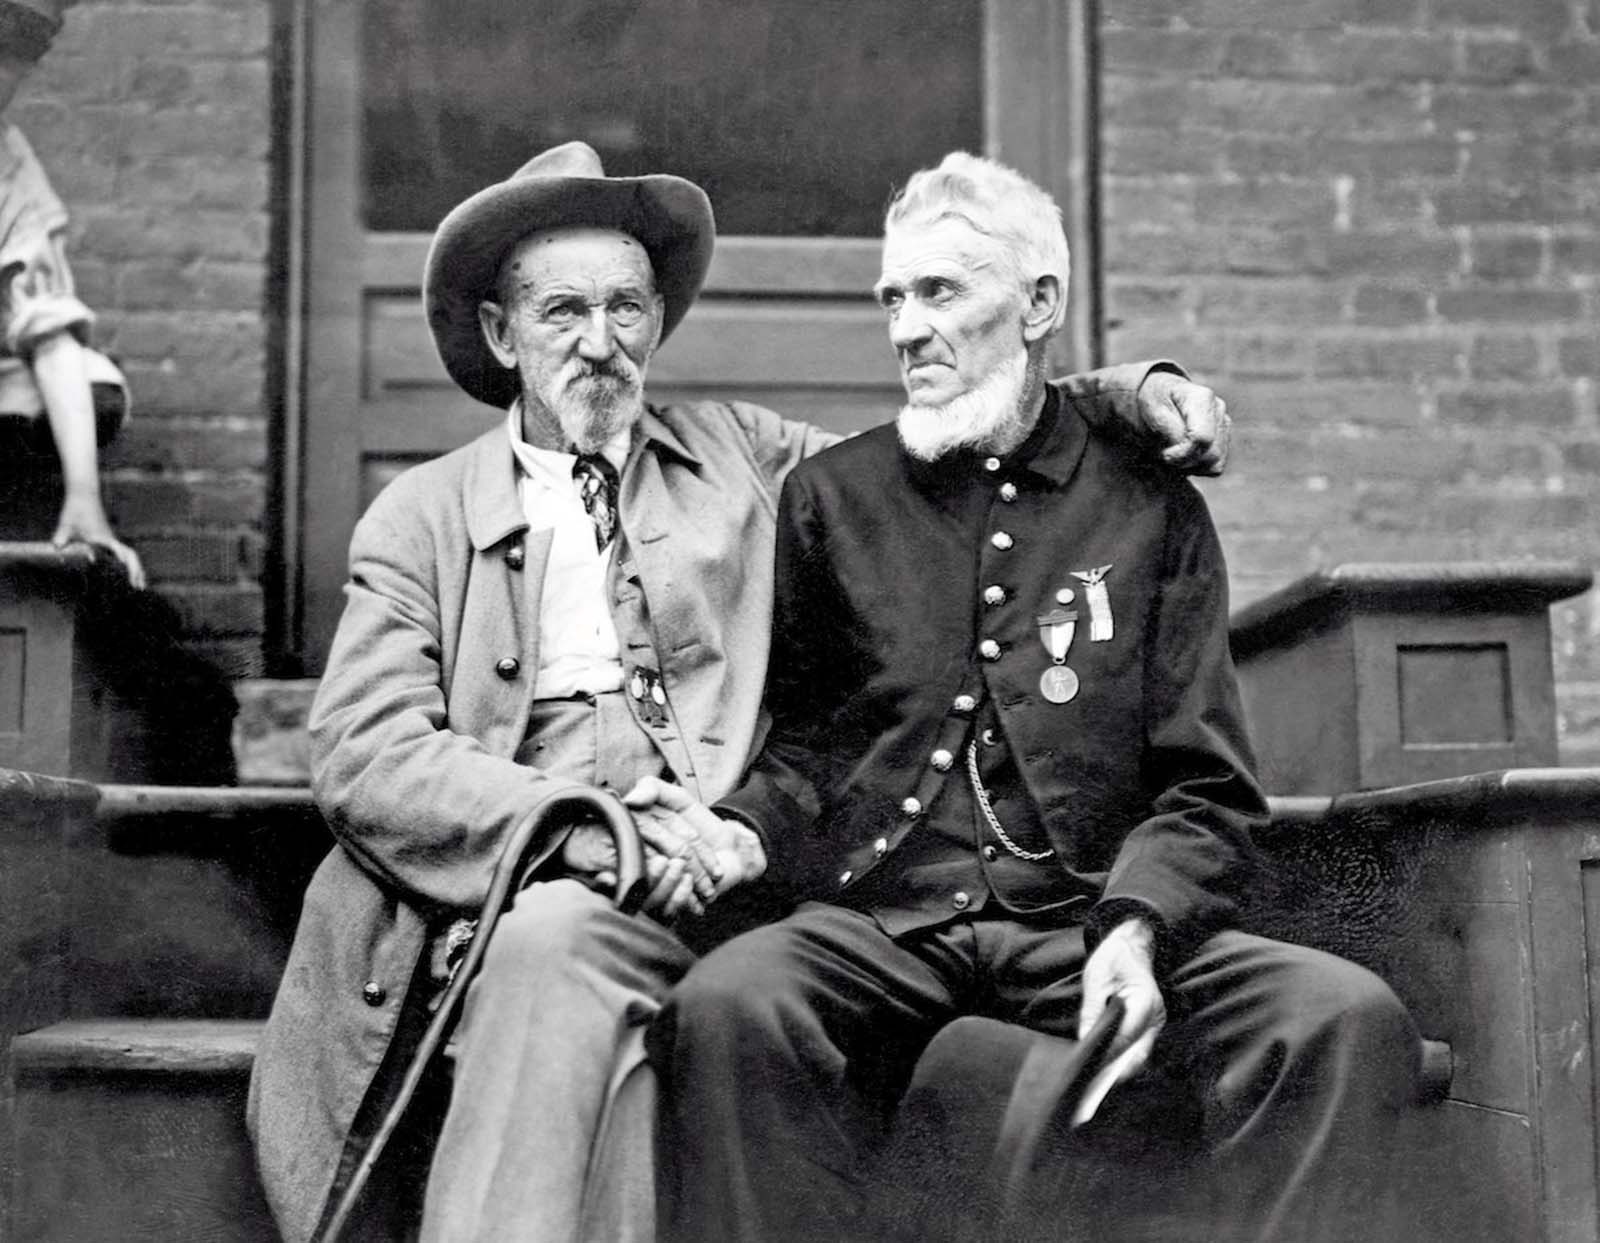 A veteran of the Union Army shakes hands with a Confederate veteran at the Gettysburg celebration, in Pennsylvania. 1913.